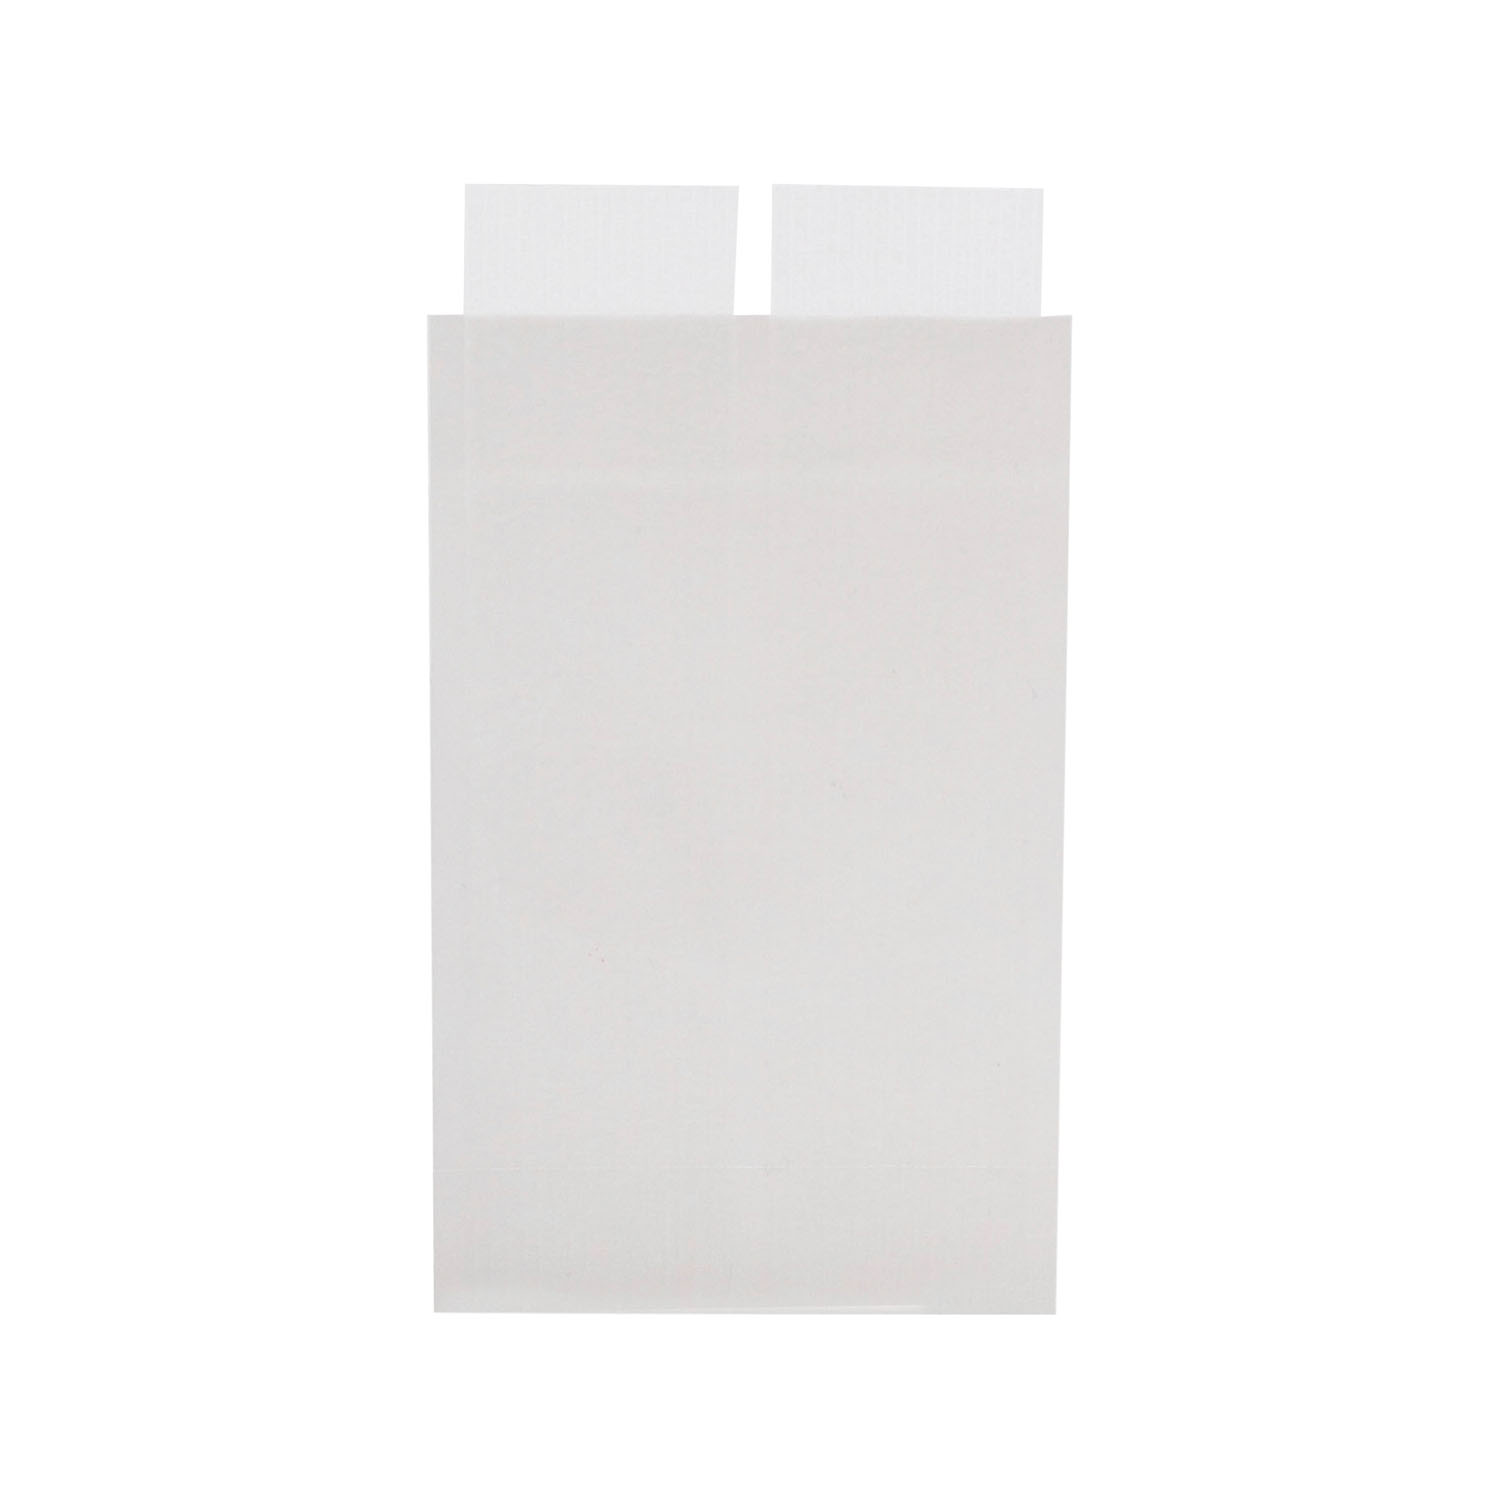 DUKAL WOUND CLOSURE STRIPS : 5158 BX $55.12 Stocked